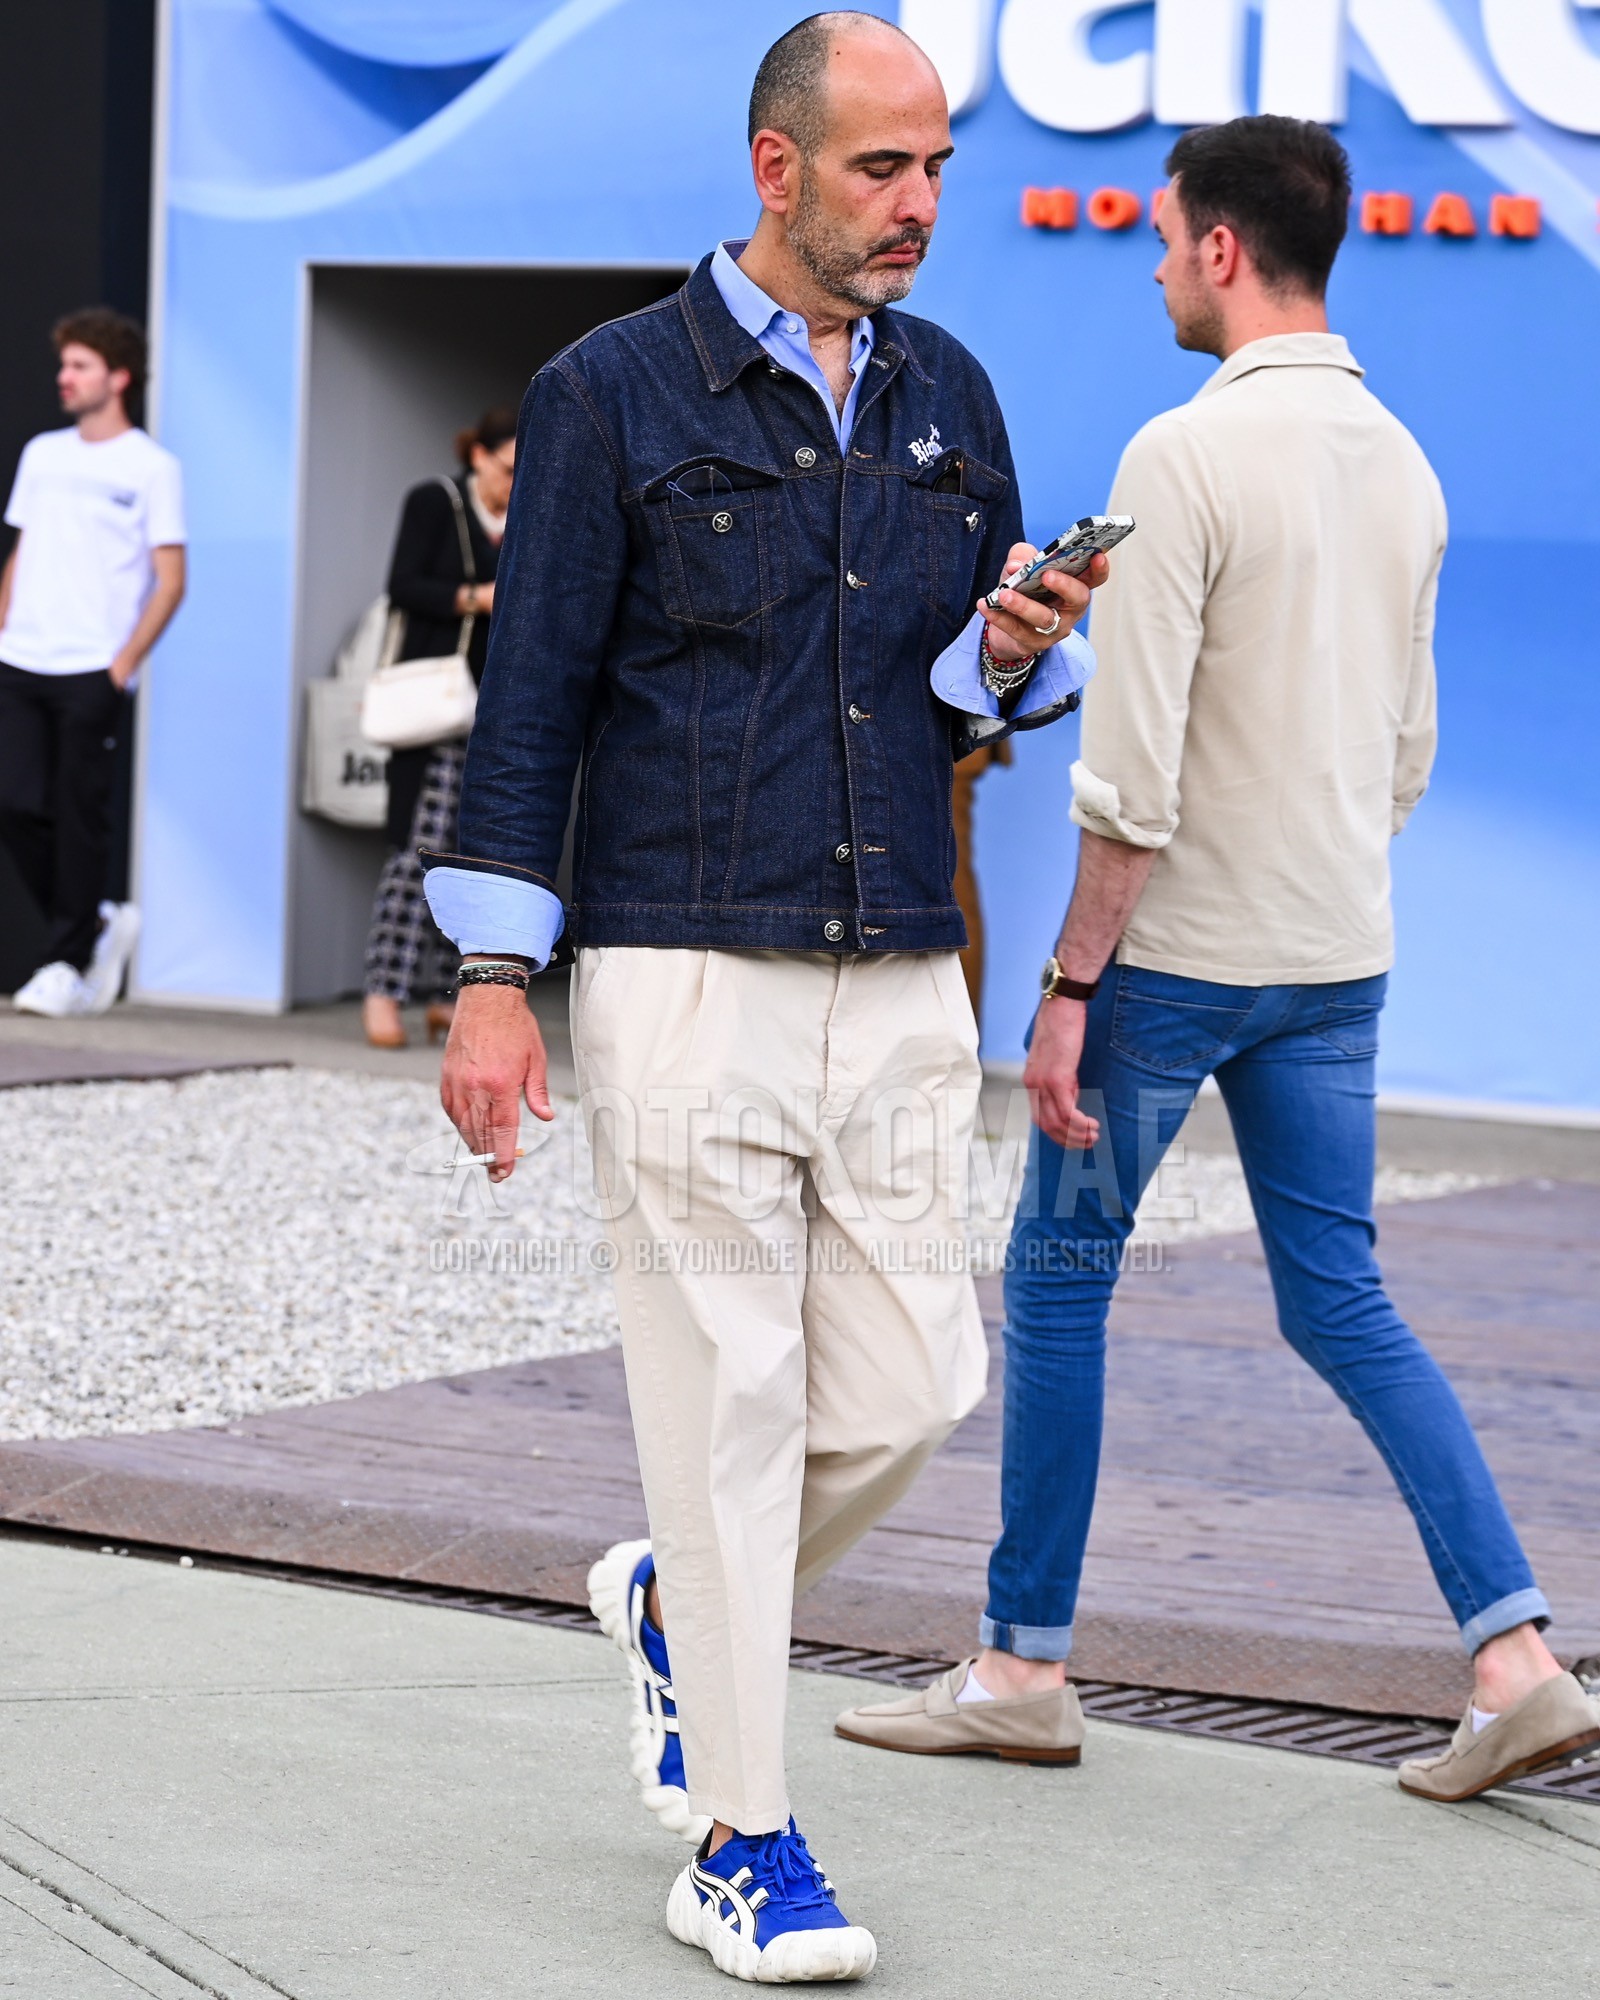 Denim Jacket with Skinny Jeans Relaxed Summer Outfits For Men In Their 30s  (18 ideas & outfits) | Lookastic